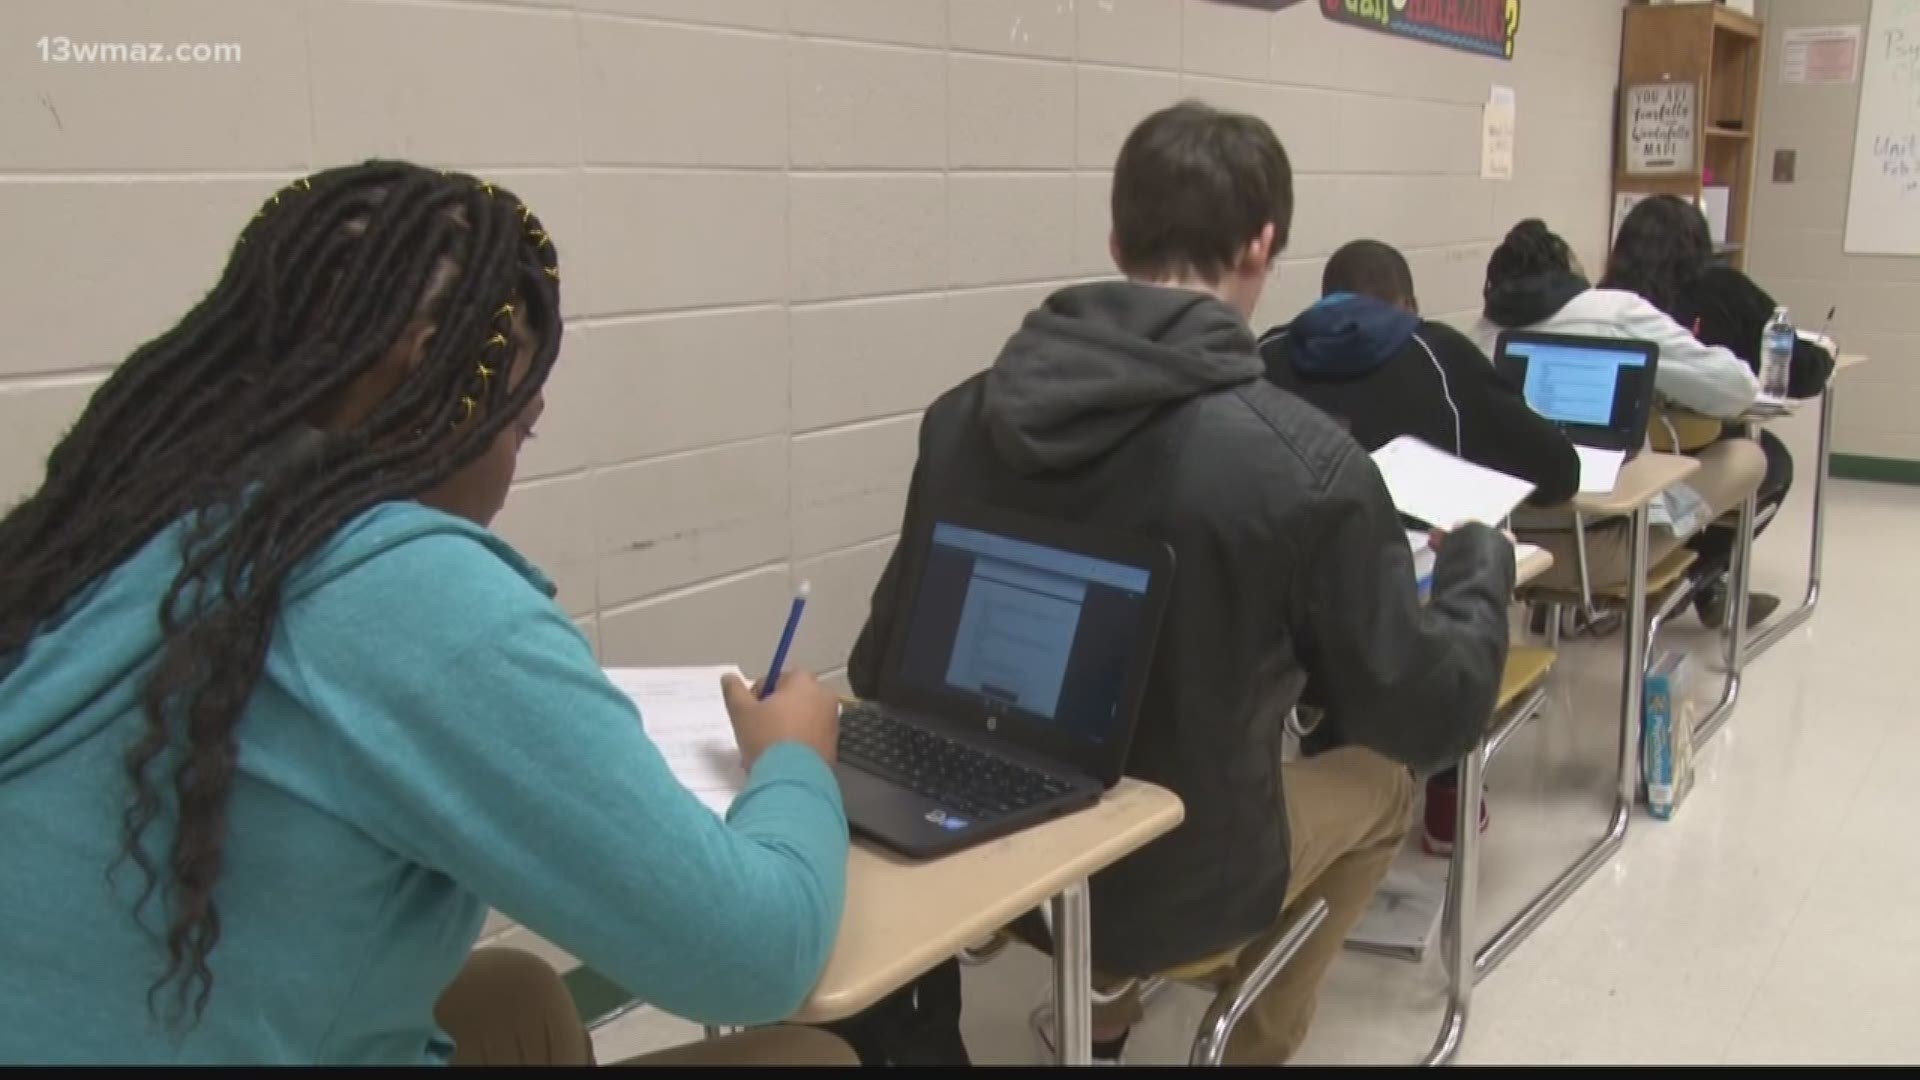 schools standardized testing waived due to COVID19